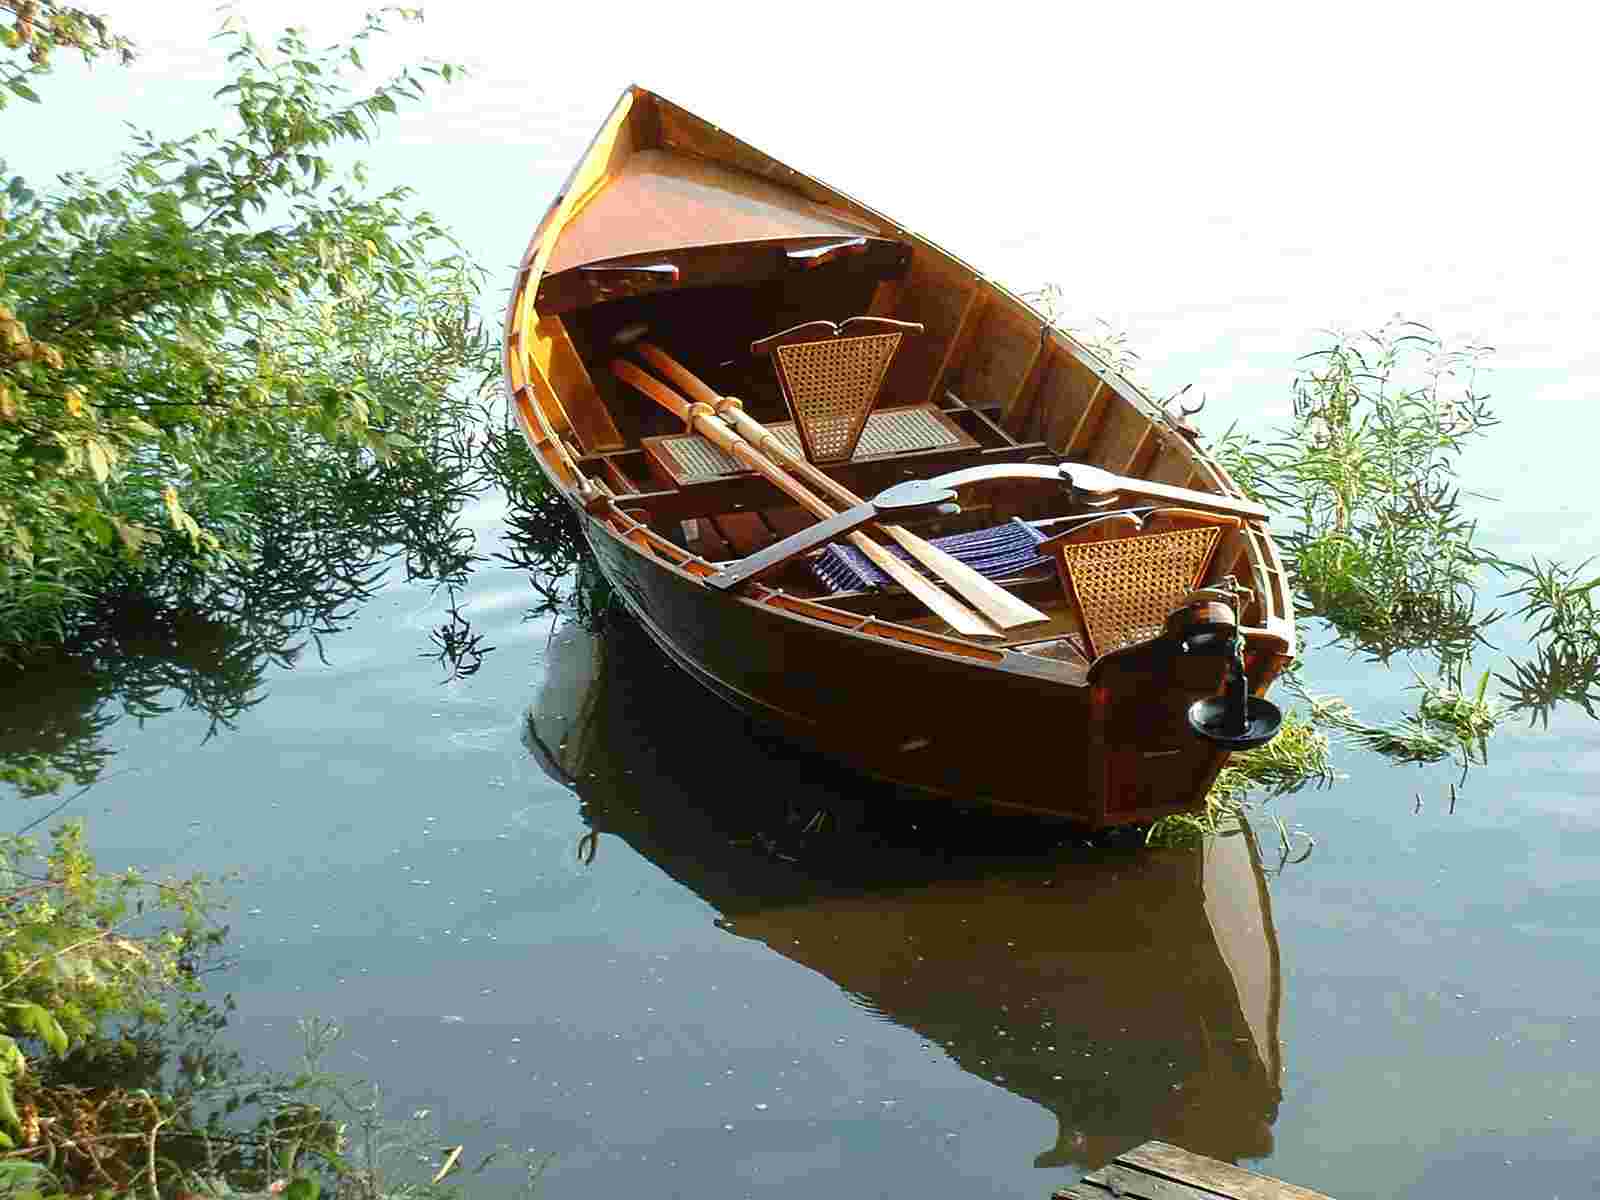 Amazon.com: Drift Boats and River Dories: Their History, Design